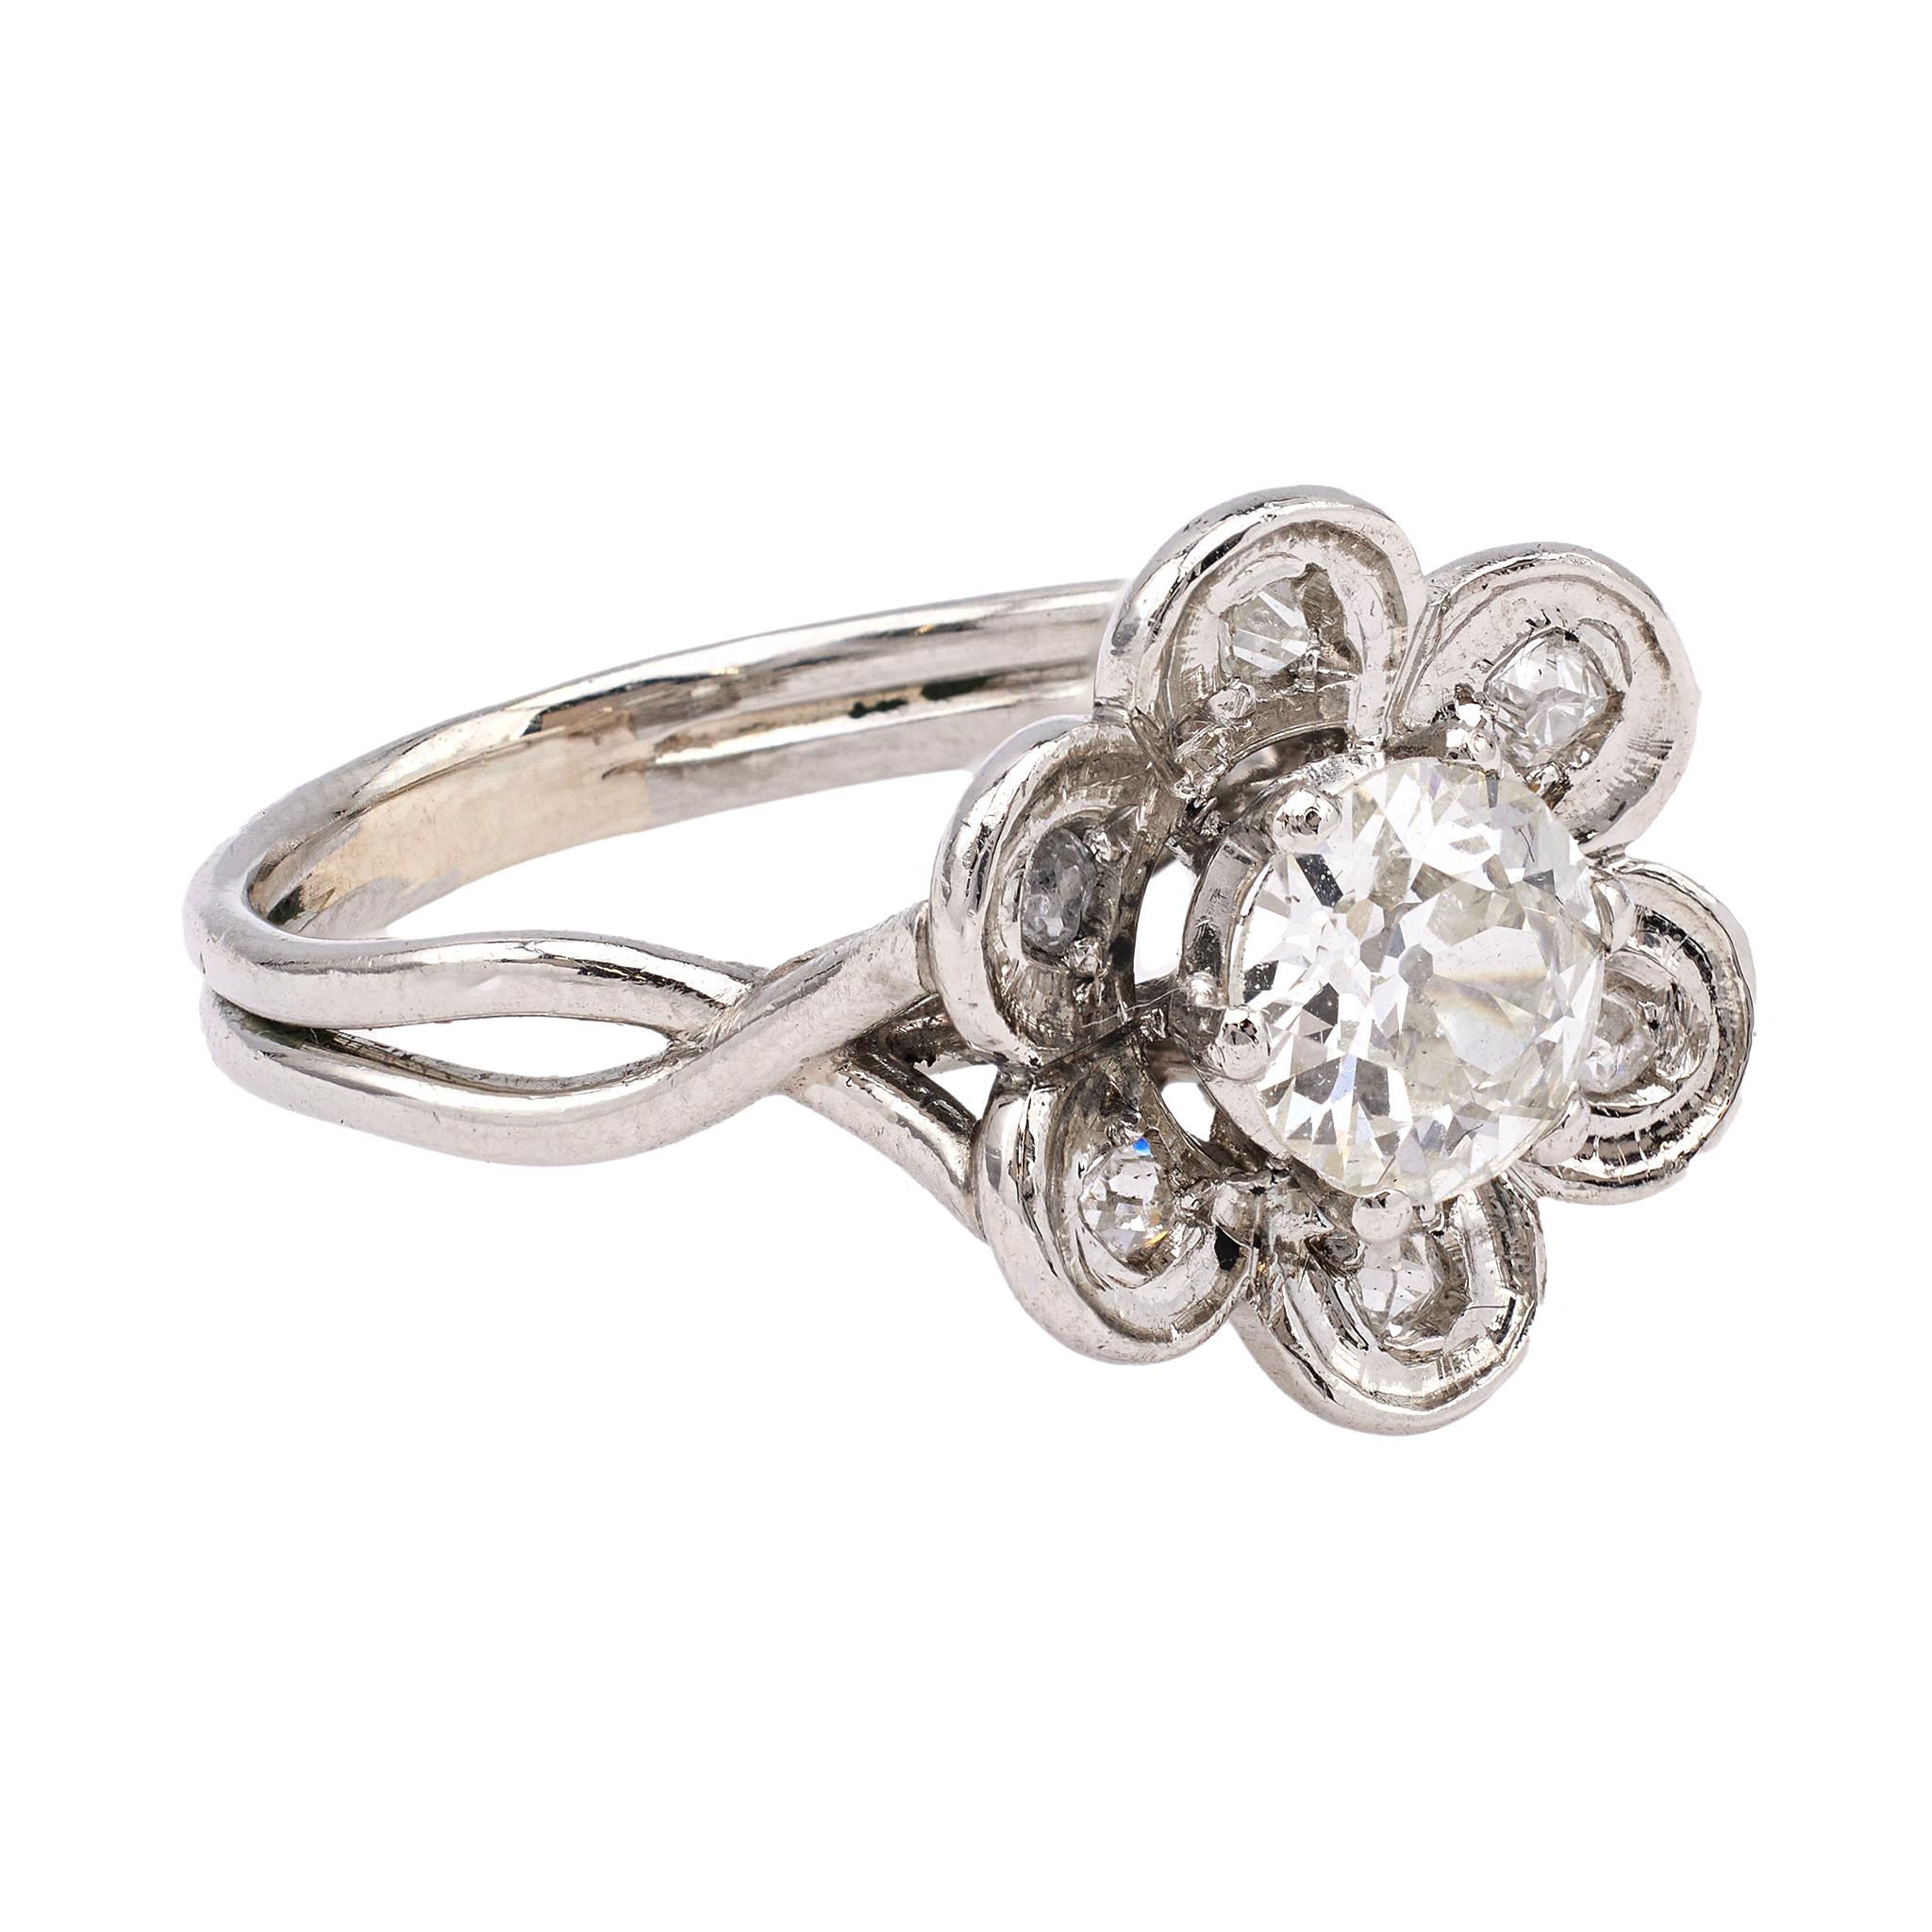 Mid Century French GIA 0.90 Carat Old European Cut Diamond Platinum Flower Ring For Sale 1